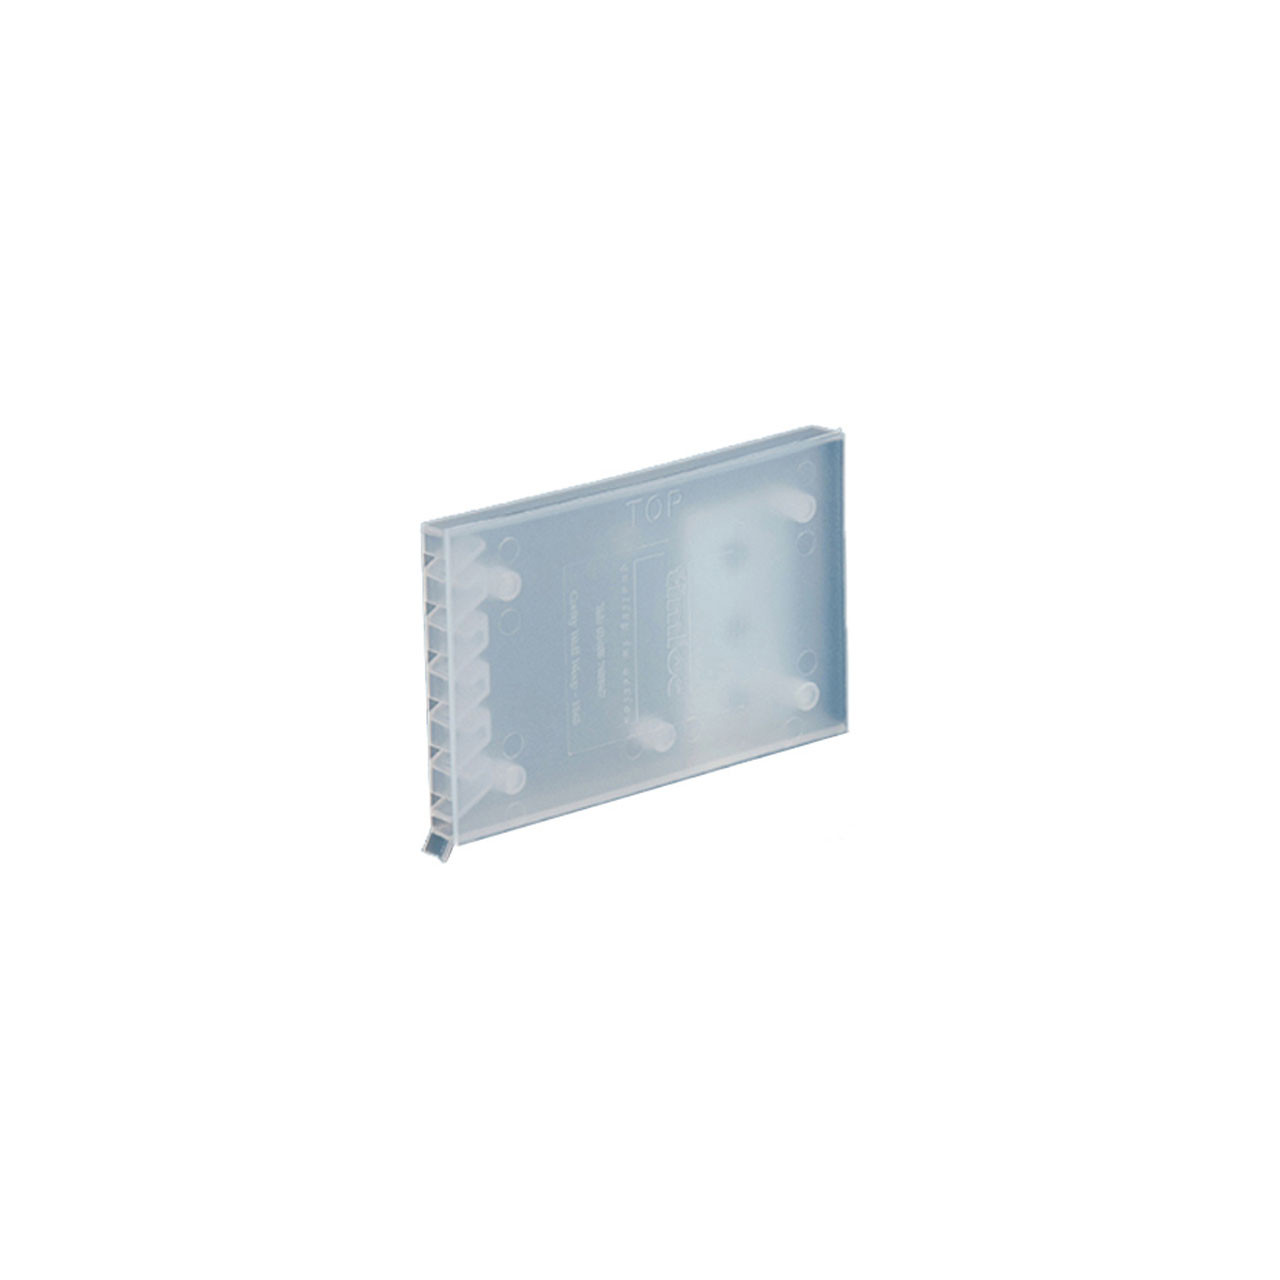 Photograph of Timloc 1143 Cavity Wall Weep With Vent Clear